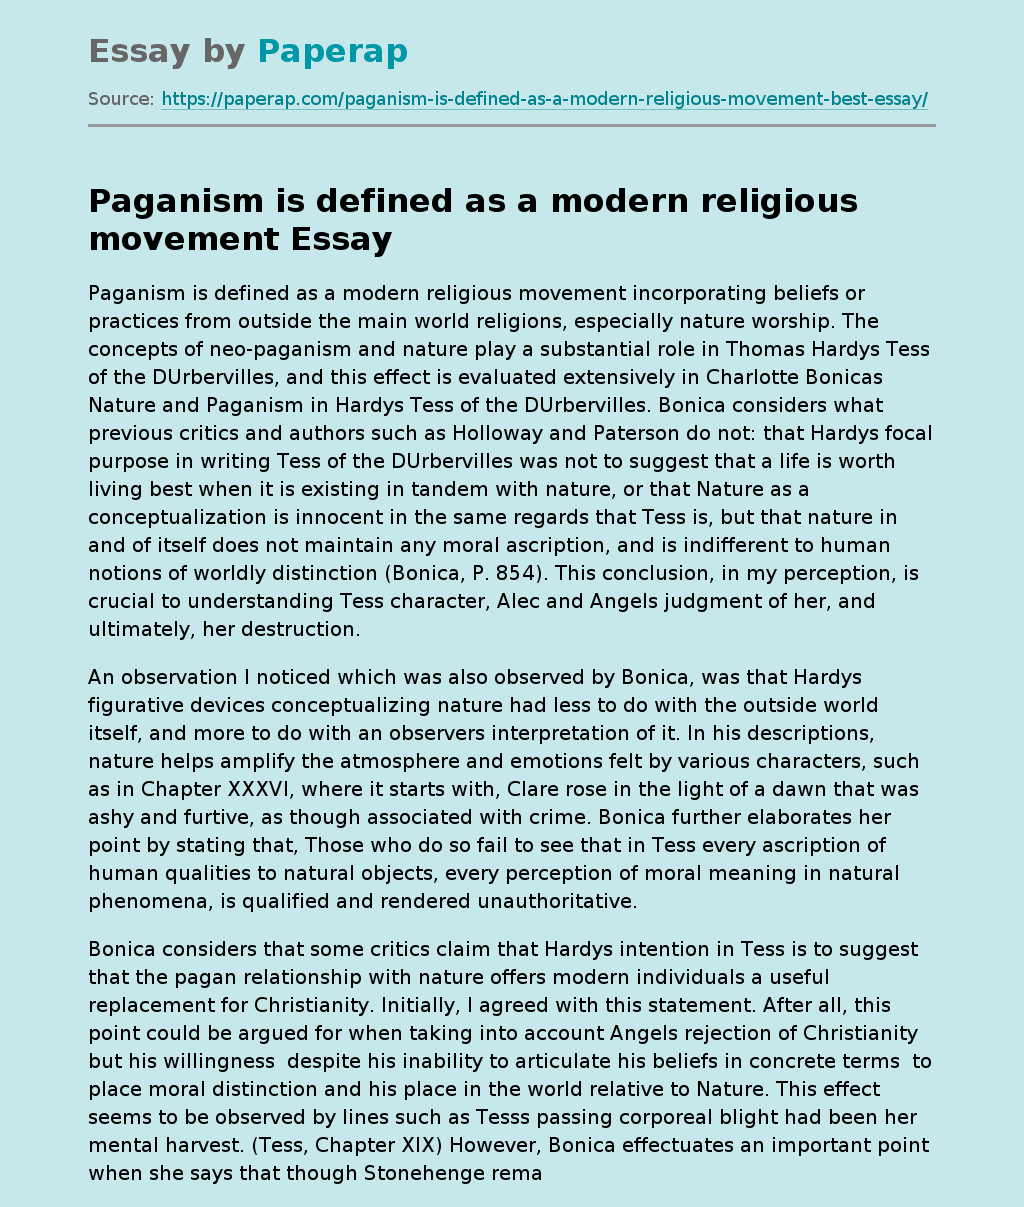 Paganism is defined as a modern religious movement